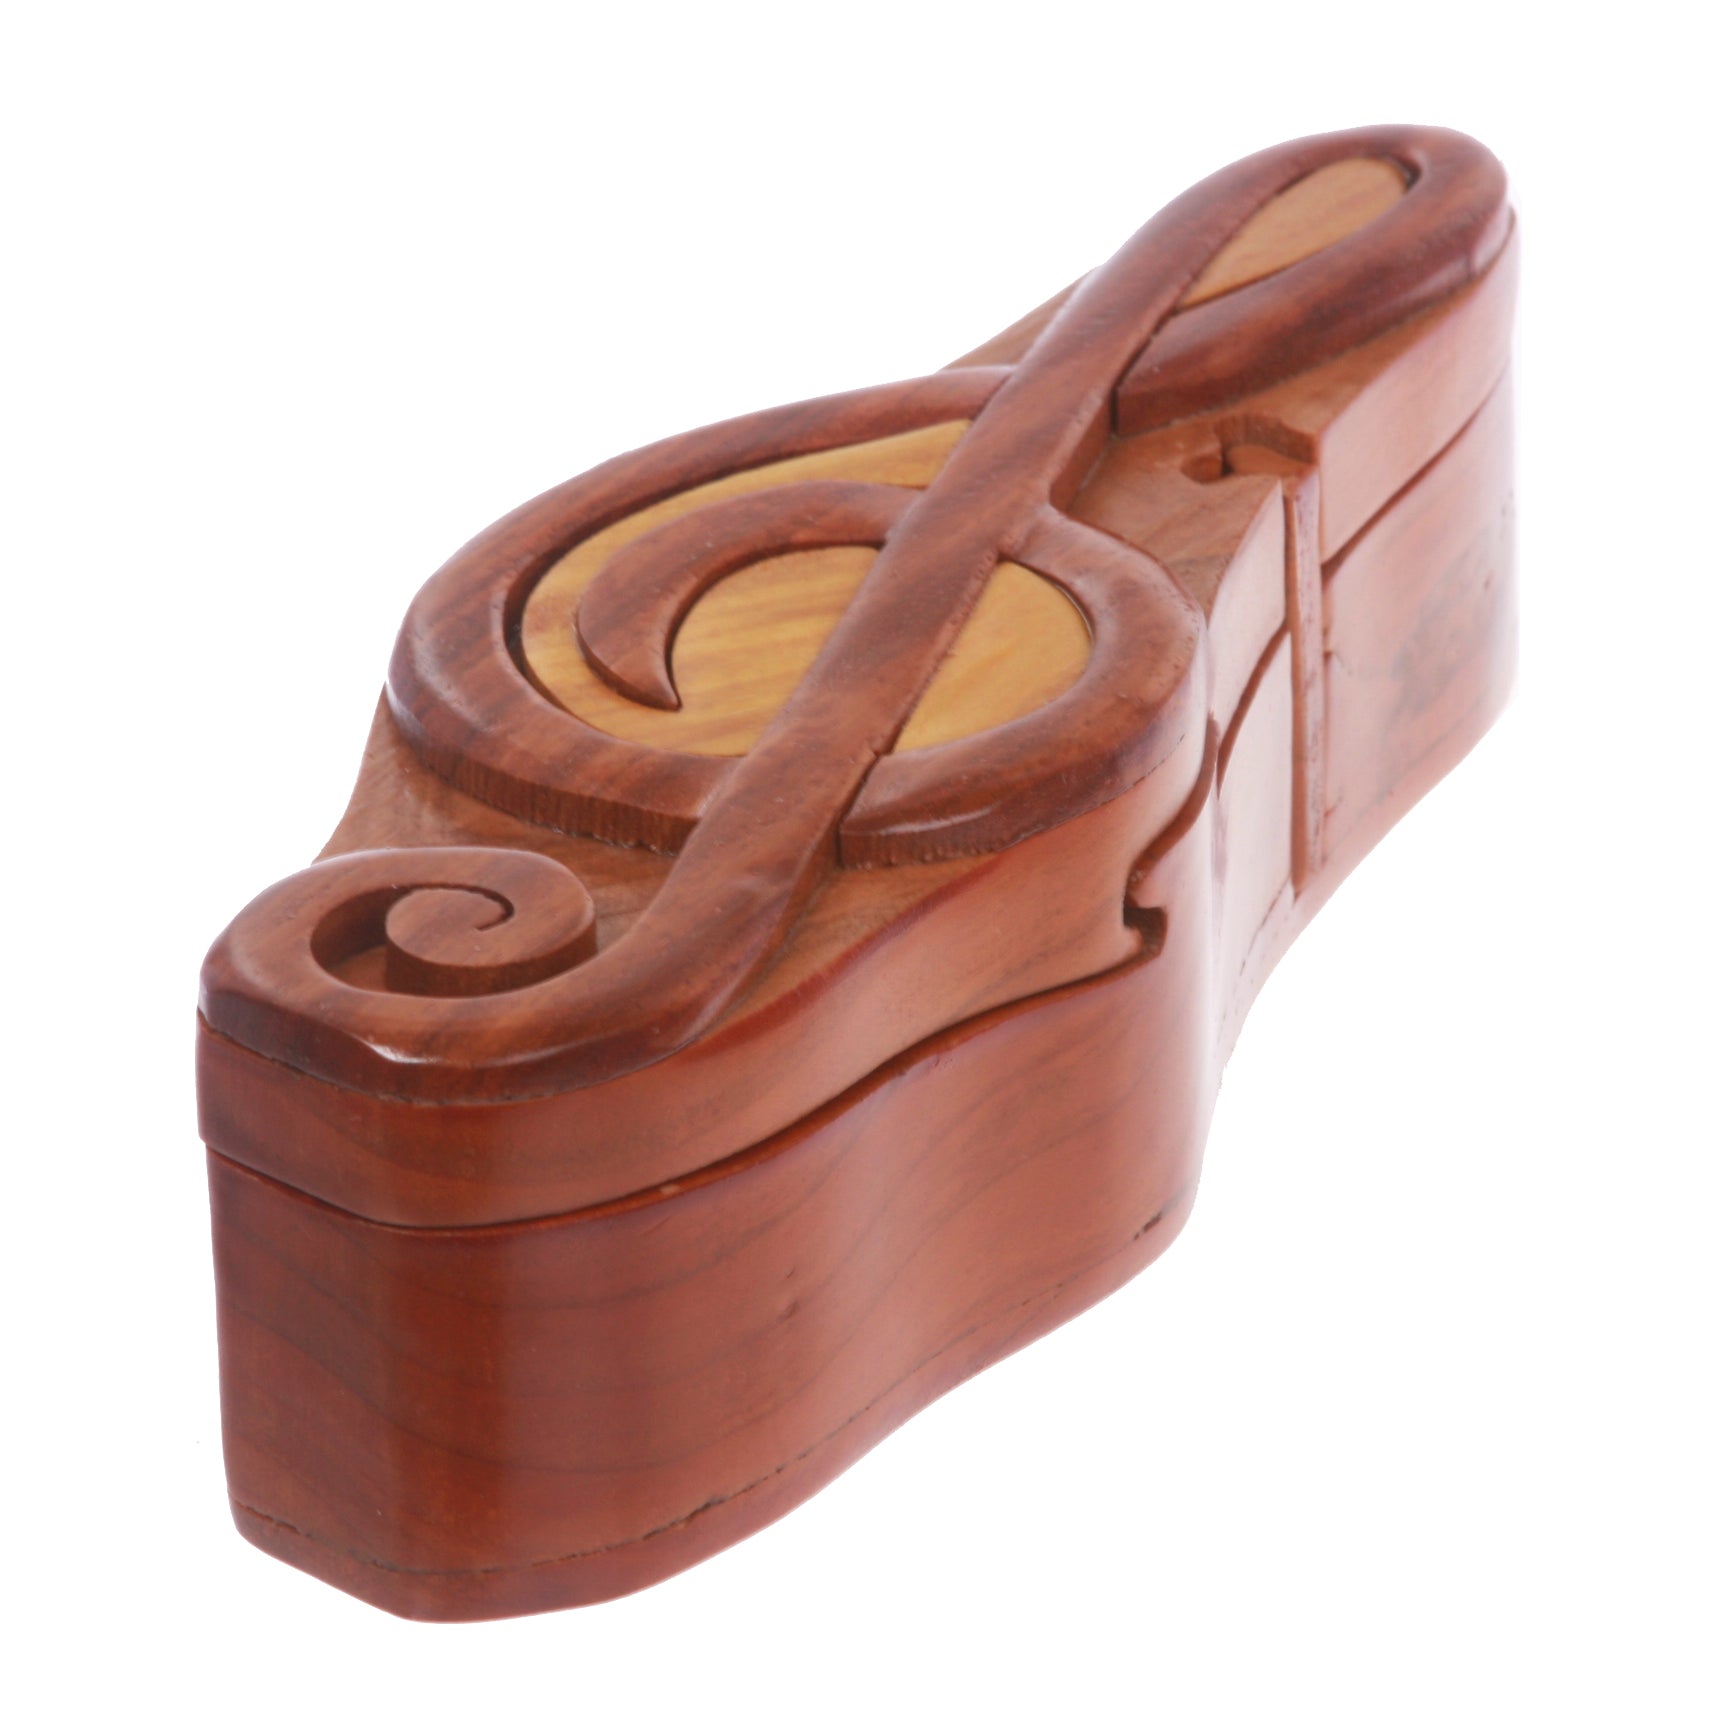 Handcrafted Wooden Music Note Shape Secret Jewelry Puzzle Box - Treble clef